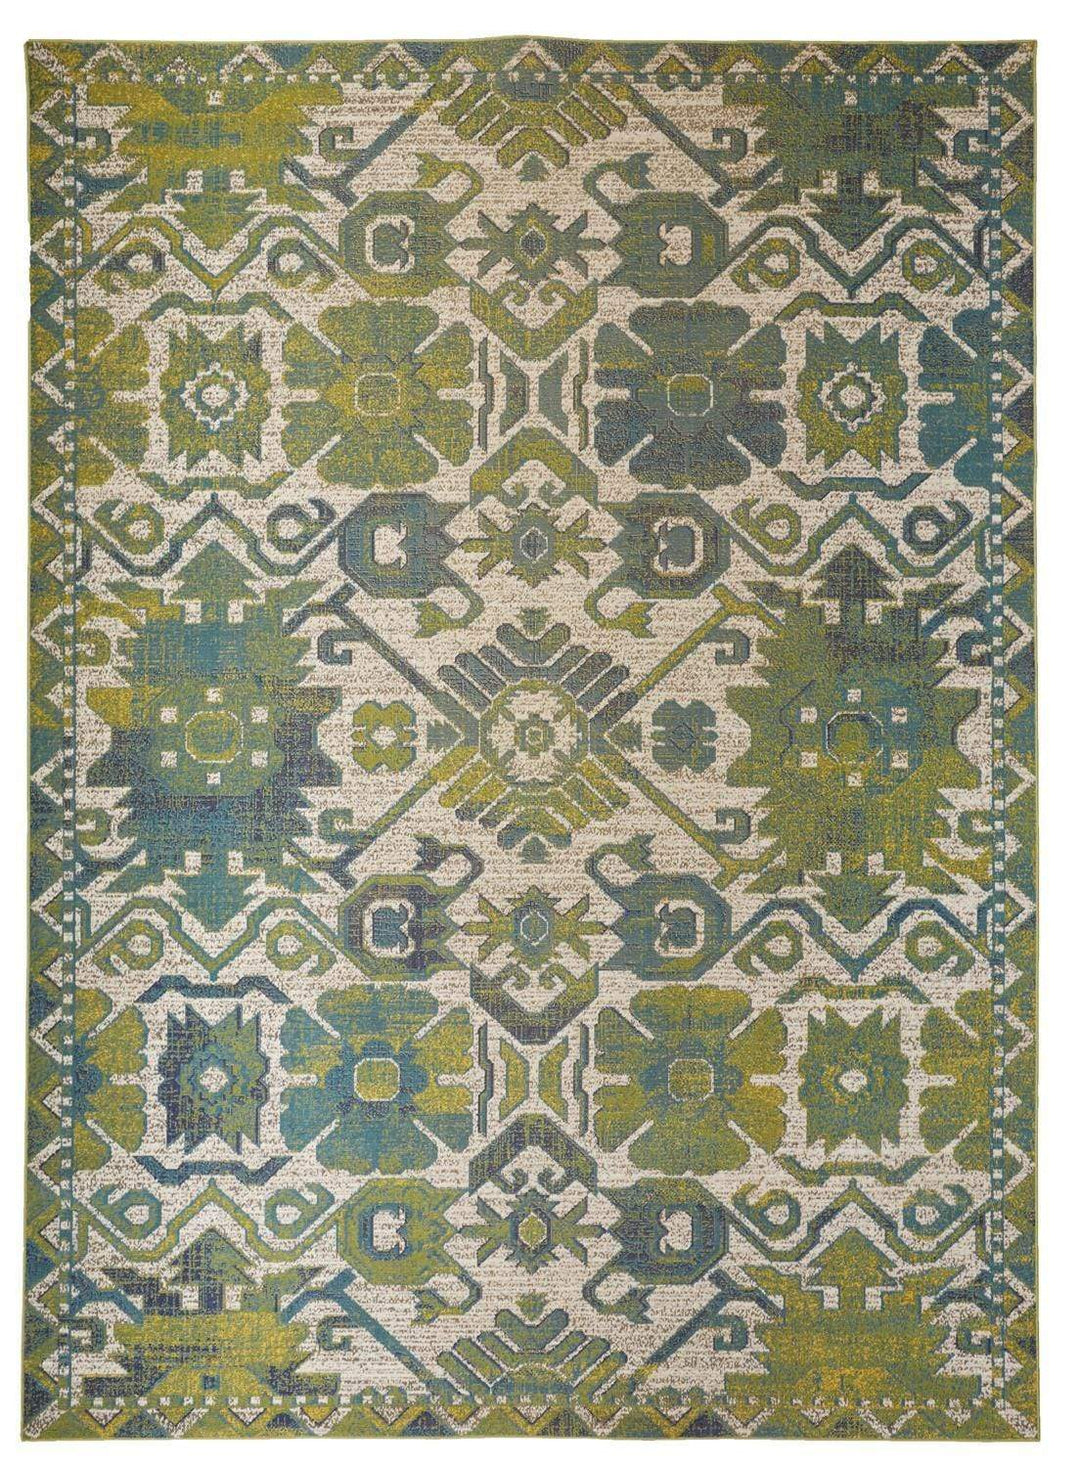 Feizy Feizy Foster Modern Style Slavic Kilim Rug - Citron Green & Teal - Available in 7 Sizes 4'-3" x 6'-3" FST3758FGRNBGEC16